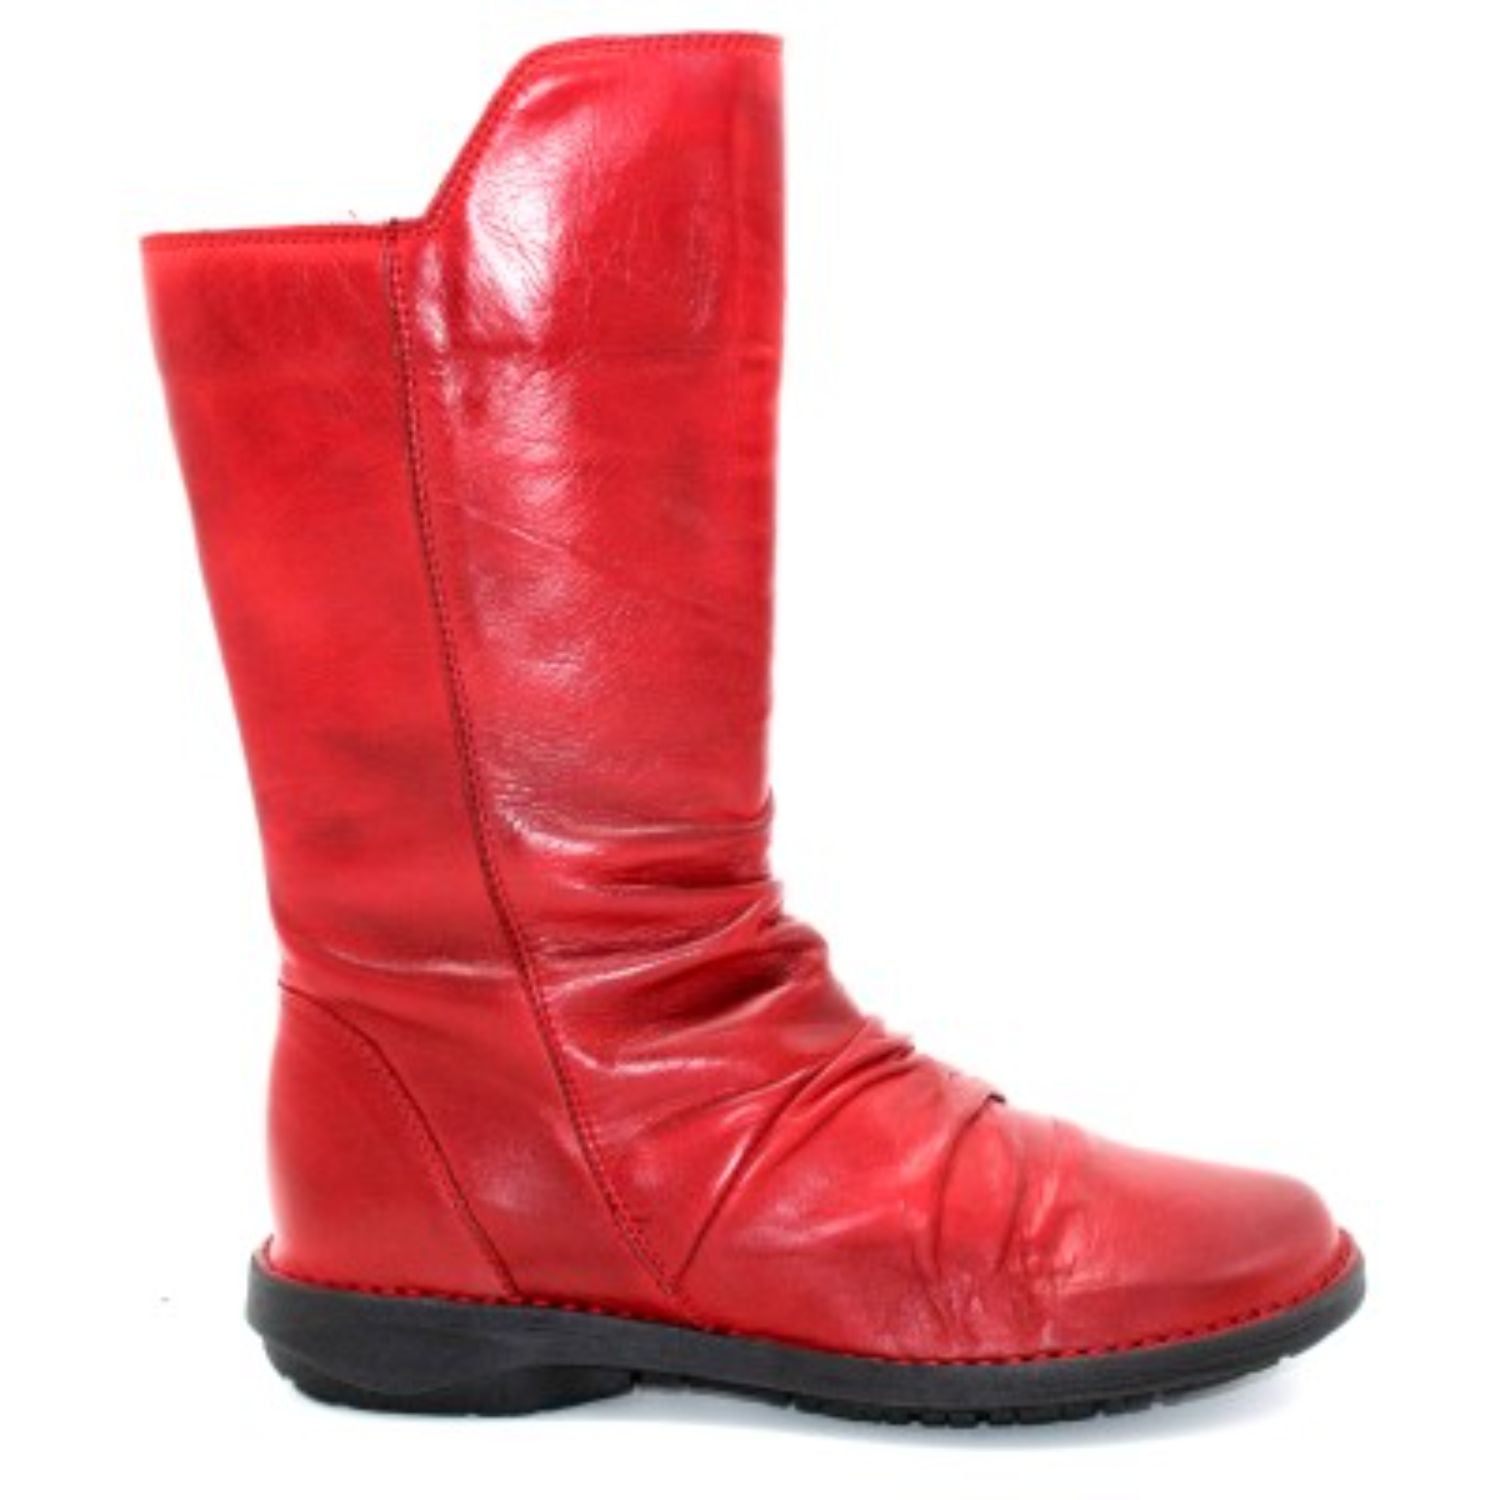 Miz Mooz - Leather Ruched Mid Boots - Parnell - Red